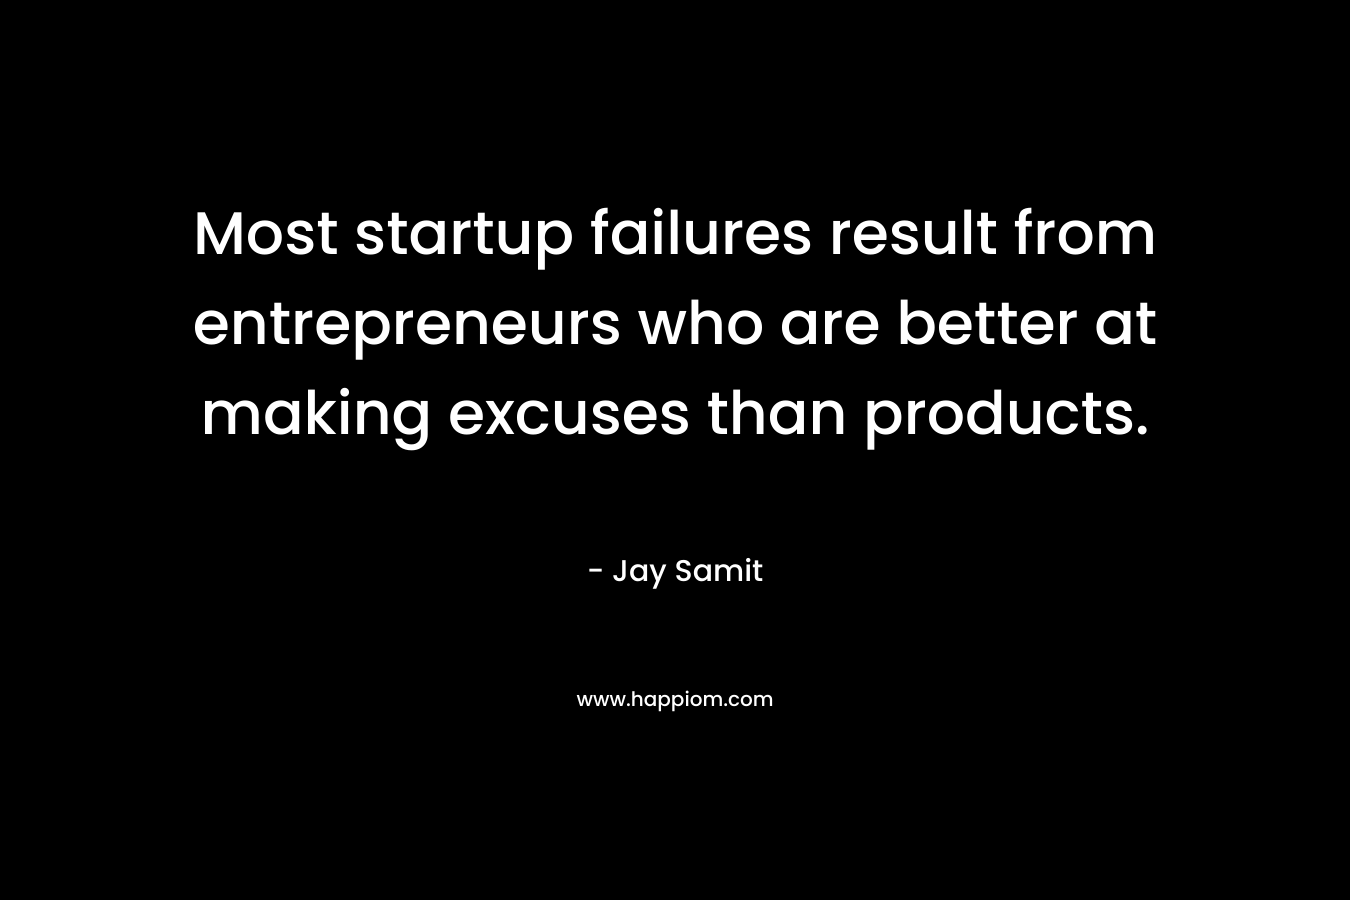 Most startup failures result from entrepreneurs who are better at making excuses than products. – Jay Samit